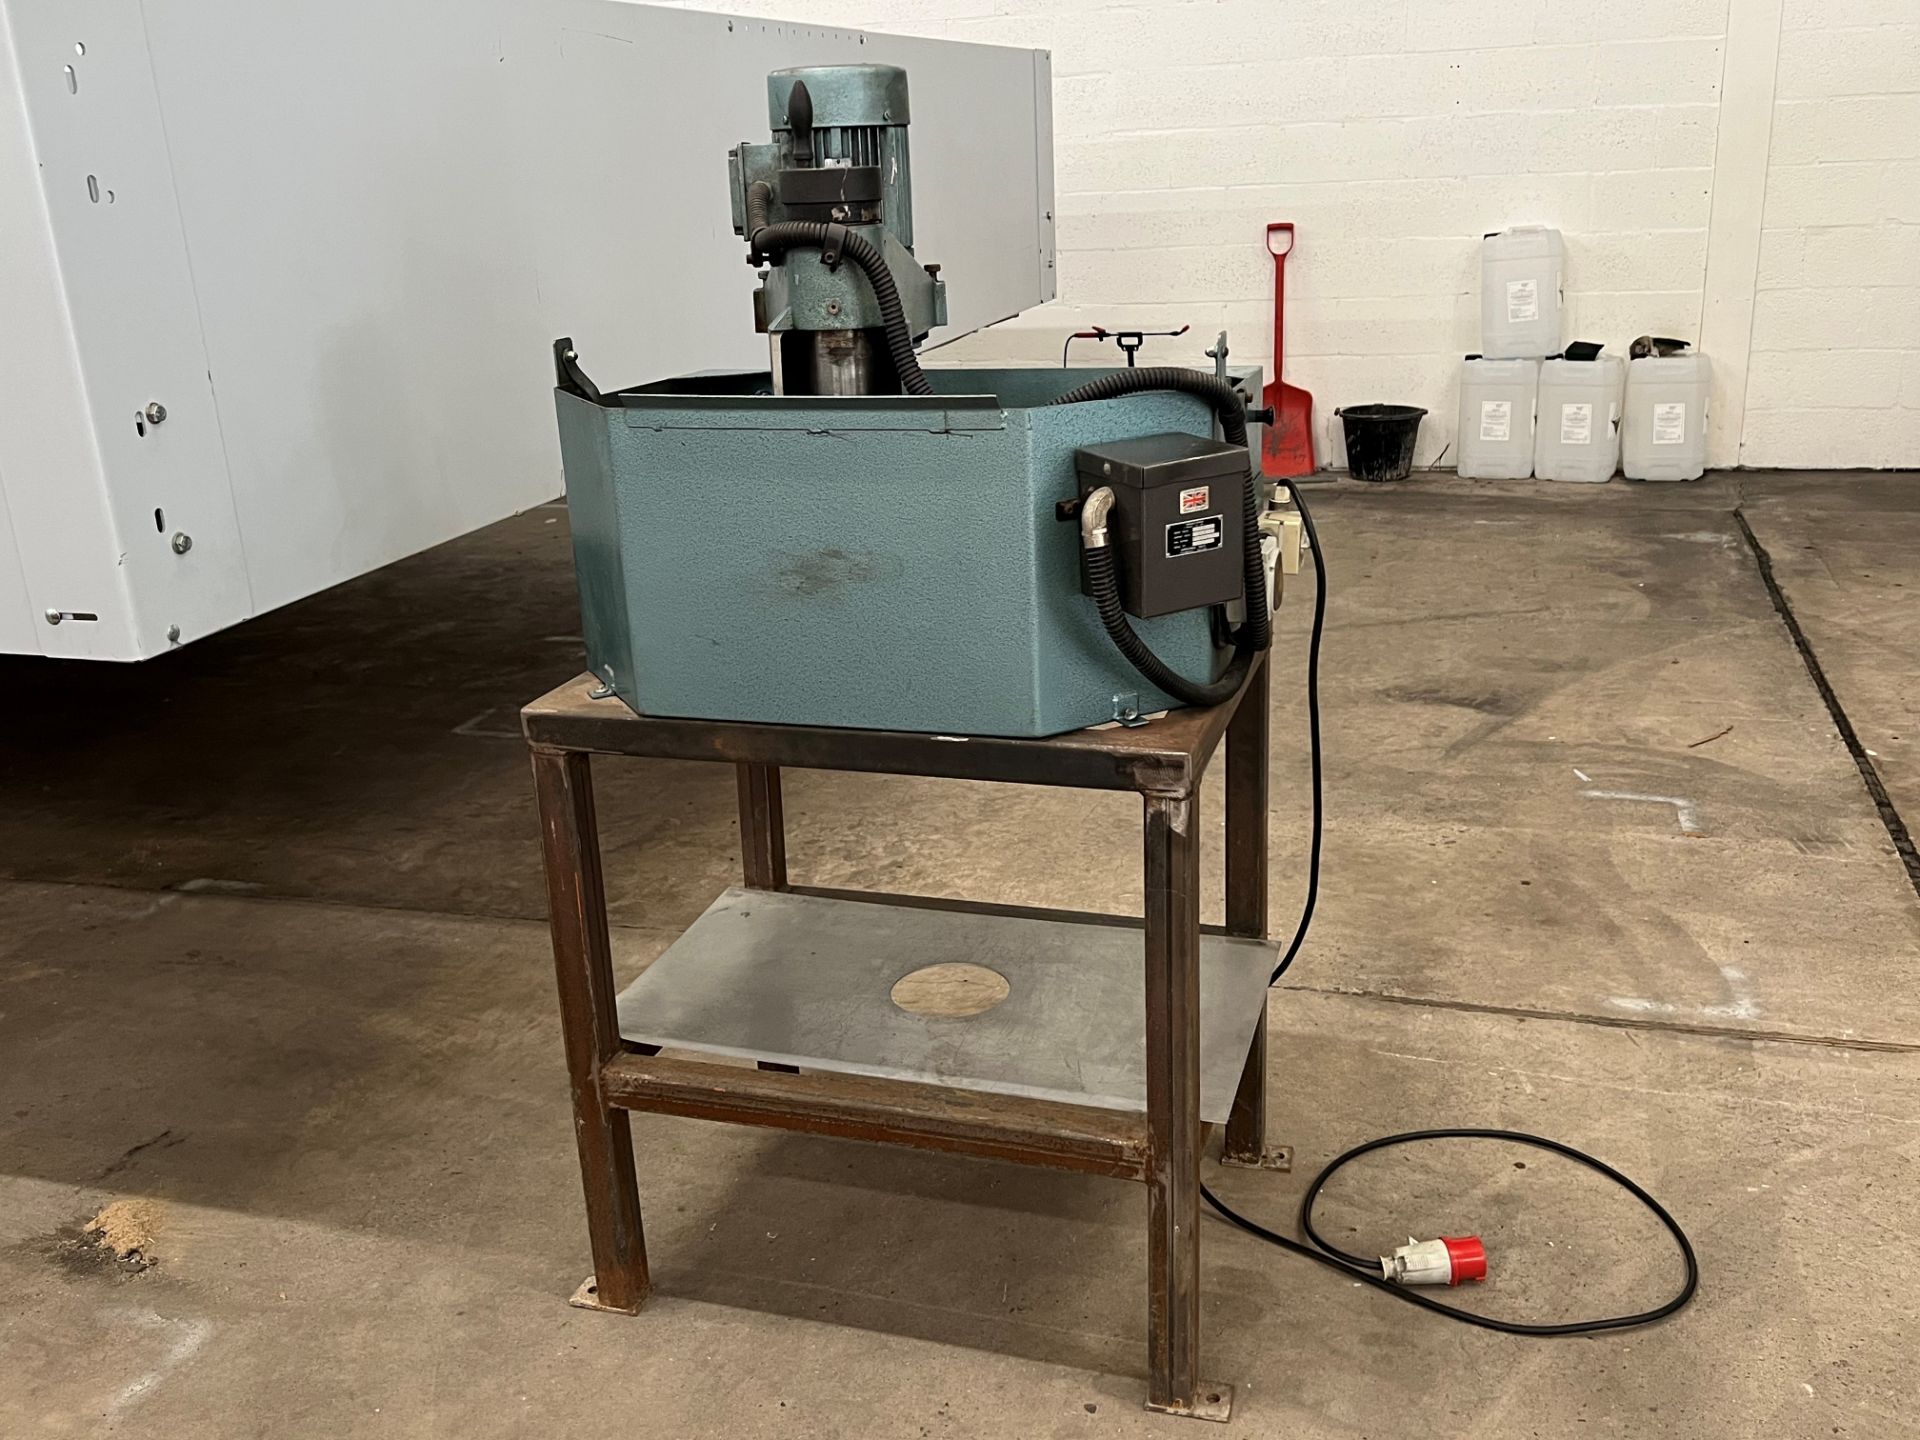 Hunton Wet Punch Die Grinder, serial no. 41585A, loading free of charge - yes, lot located at - Image 2 of 6